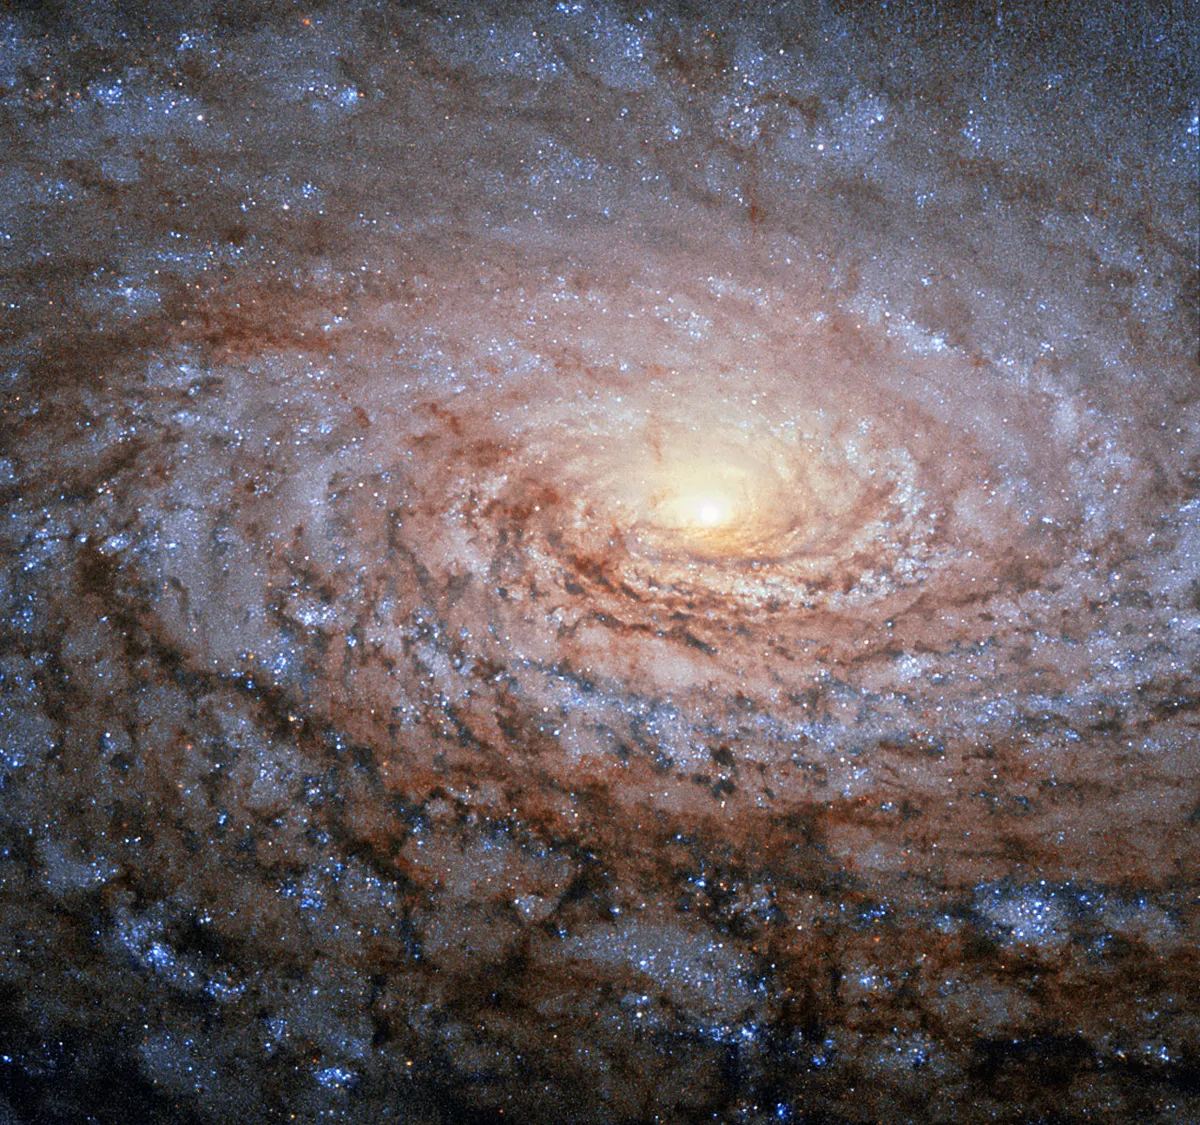 A Hubble Space Telescope image of the Sunflower Galaxy. Credit: ESA/Hubble & NASA